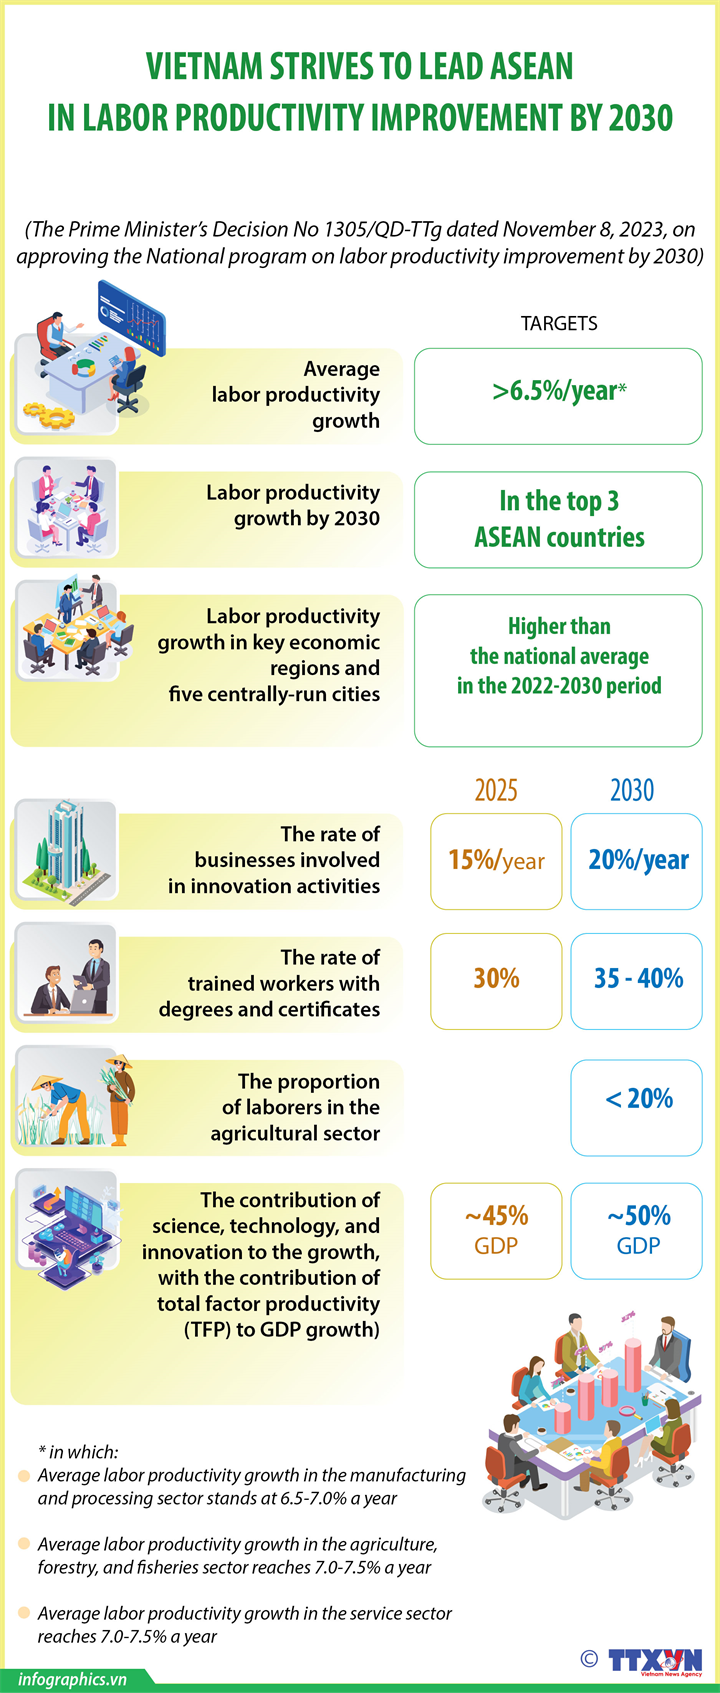 Vietnam strives to lead ASEAN in labor productivity improvement by 2030